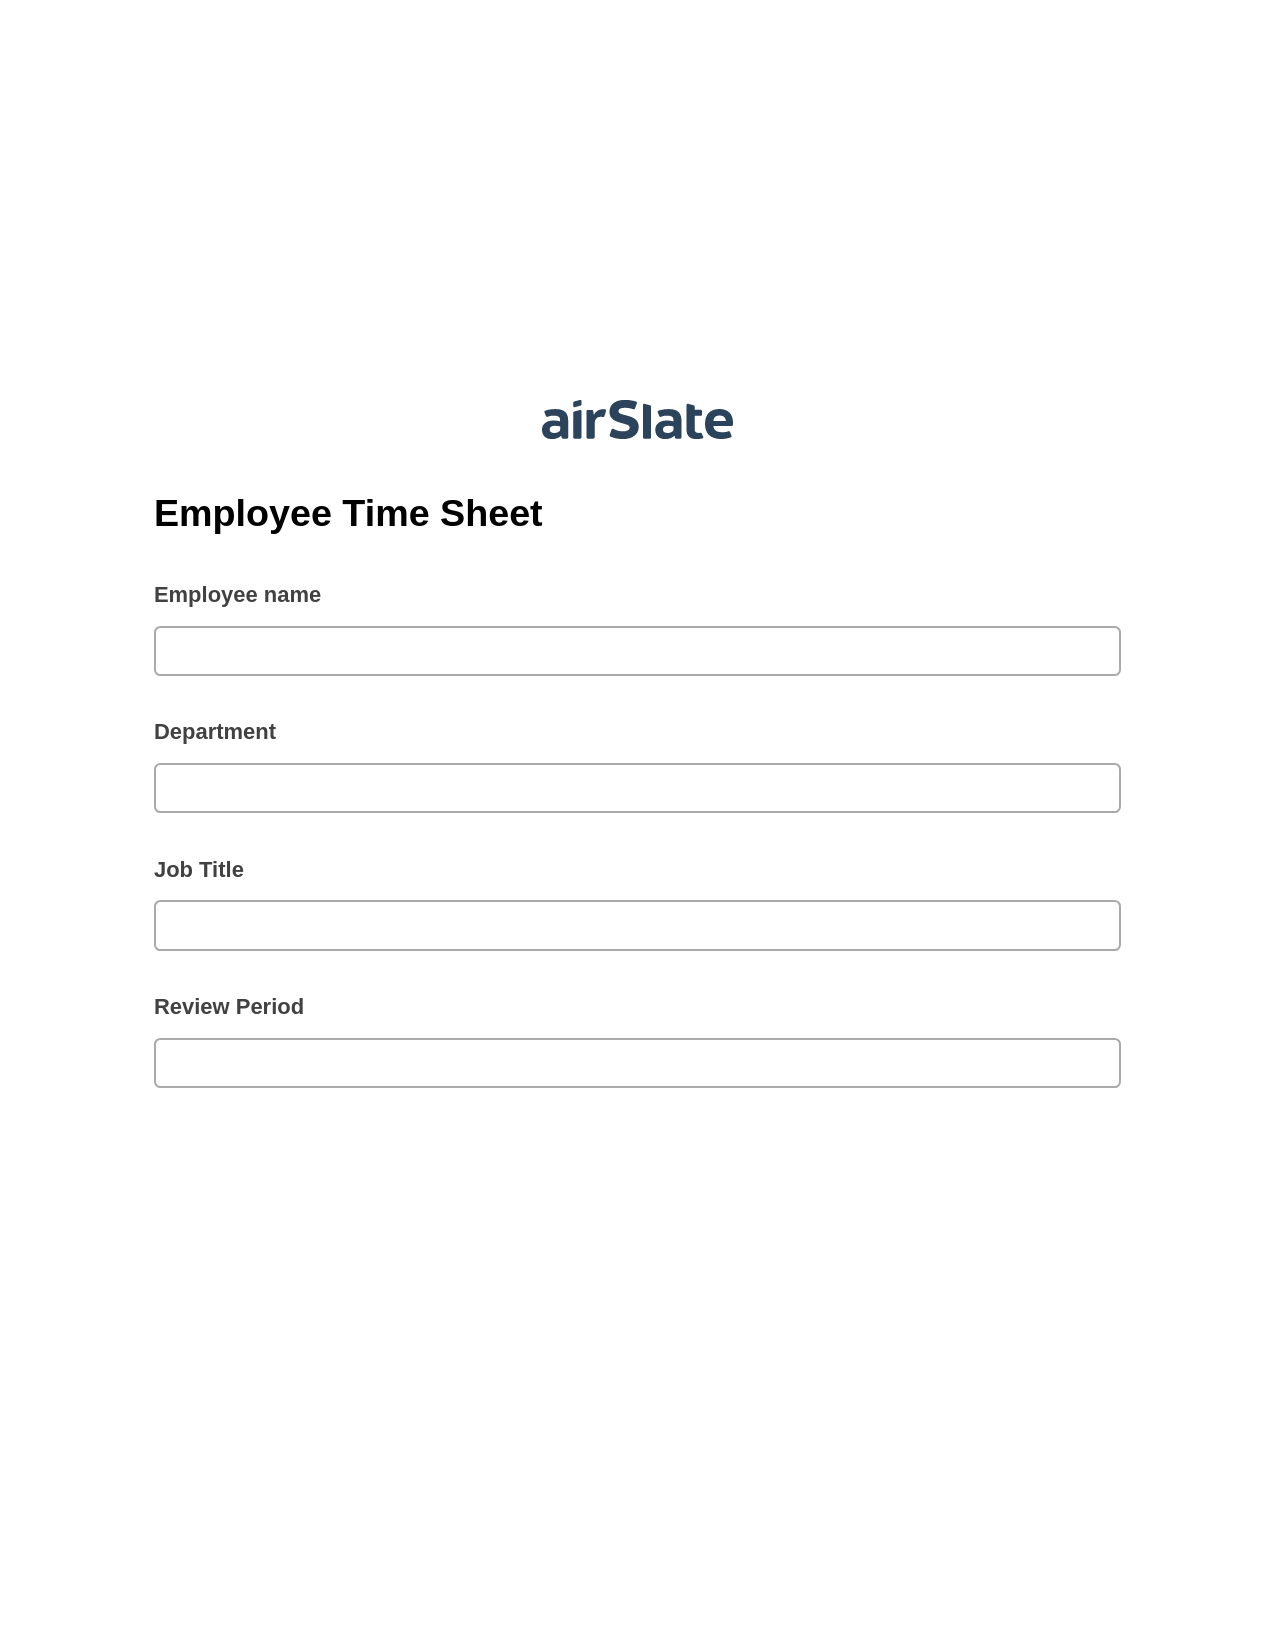 Employee Time Sheet Pre-fill Dropdowns from Airtable, Create slate addon, Archive to Box Bot